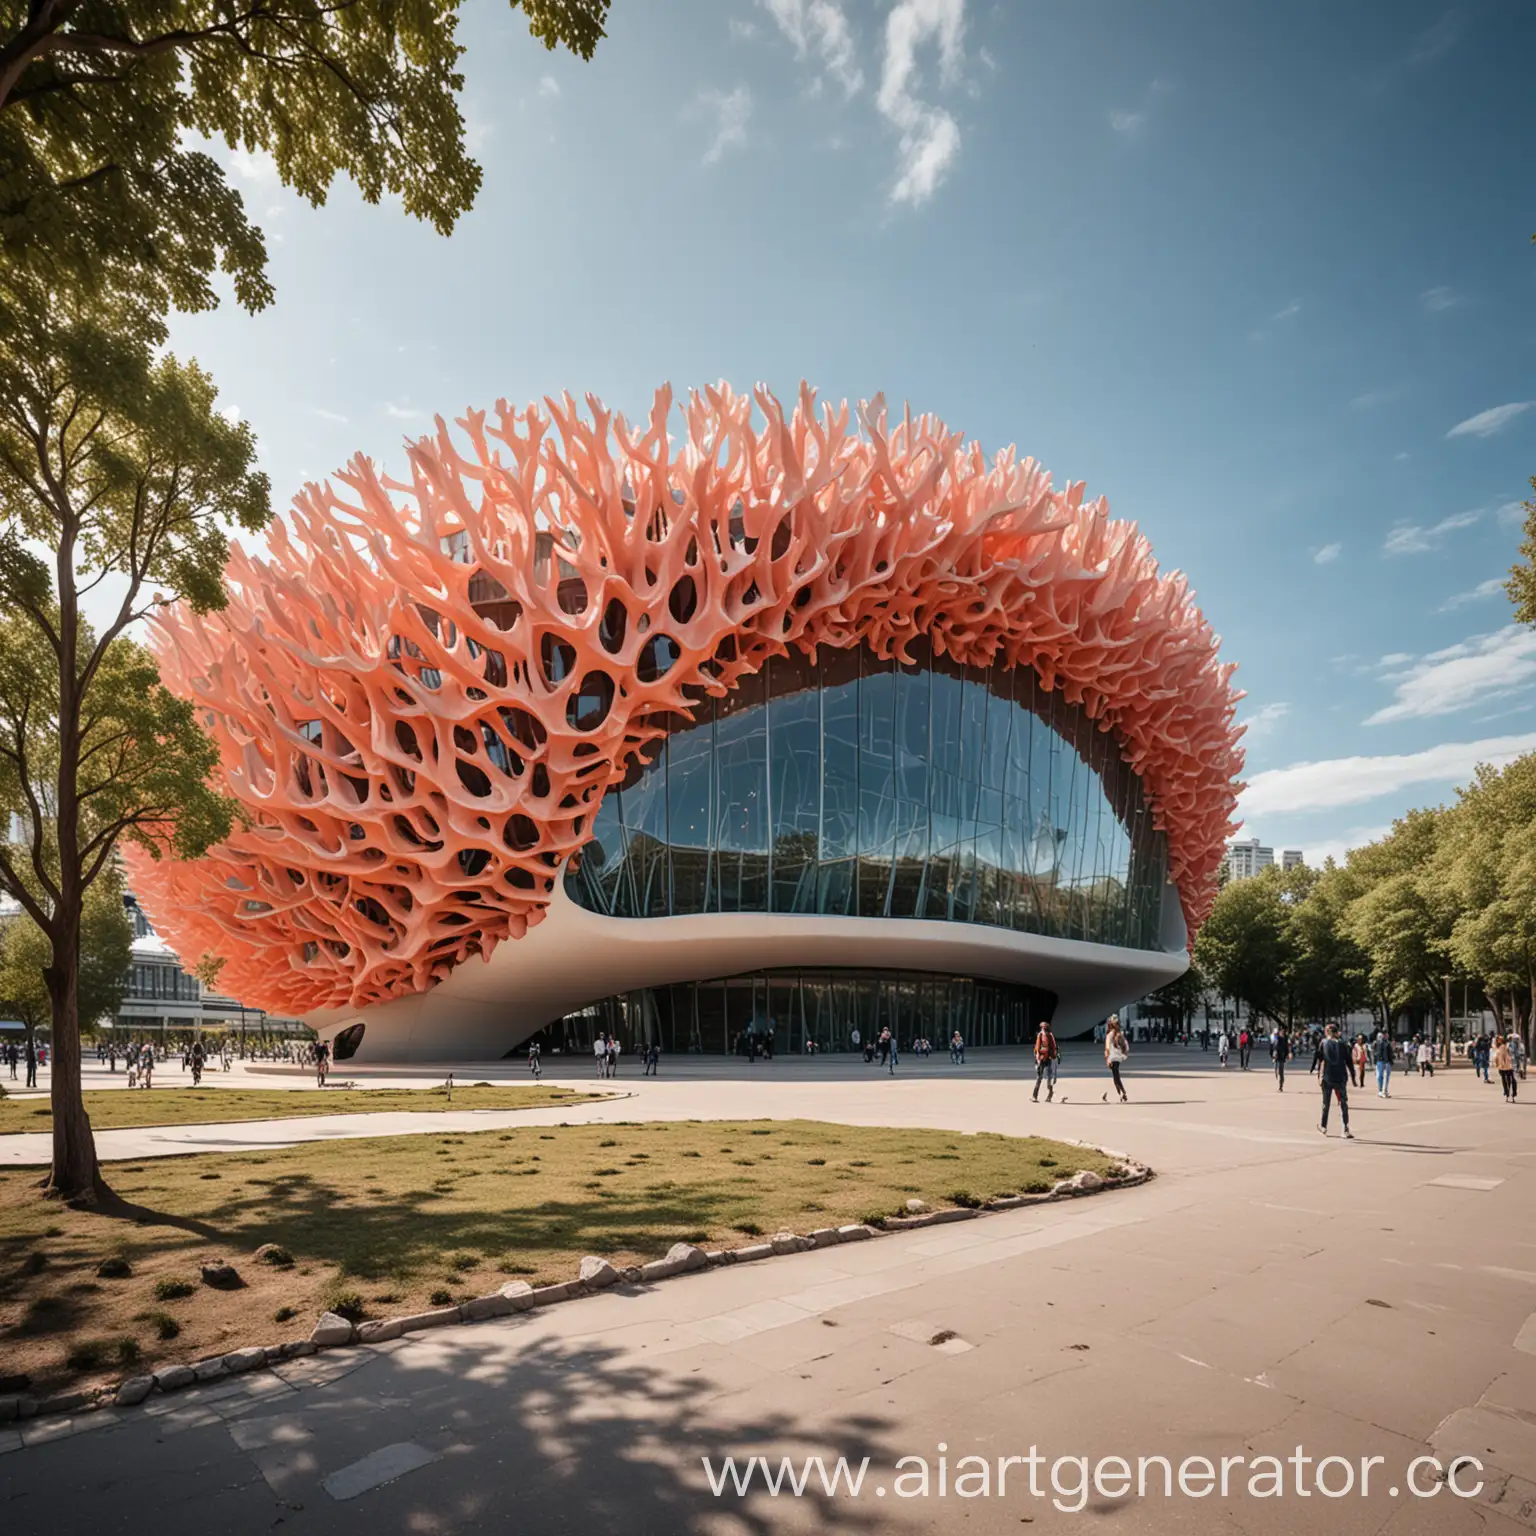 Futuristic-CoralShaped-Concert-Hall-in-Park-Setting